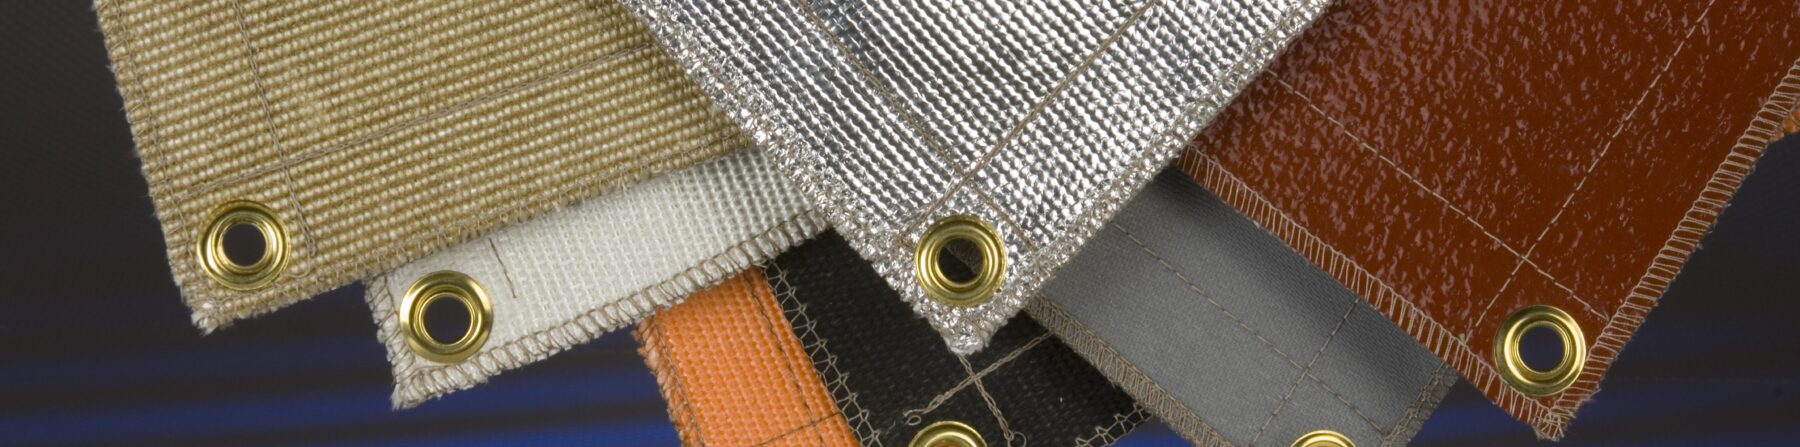 Why Industrial Fabric Finishes Matter